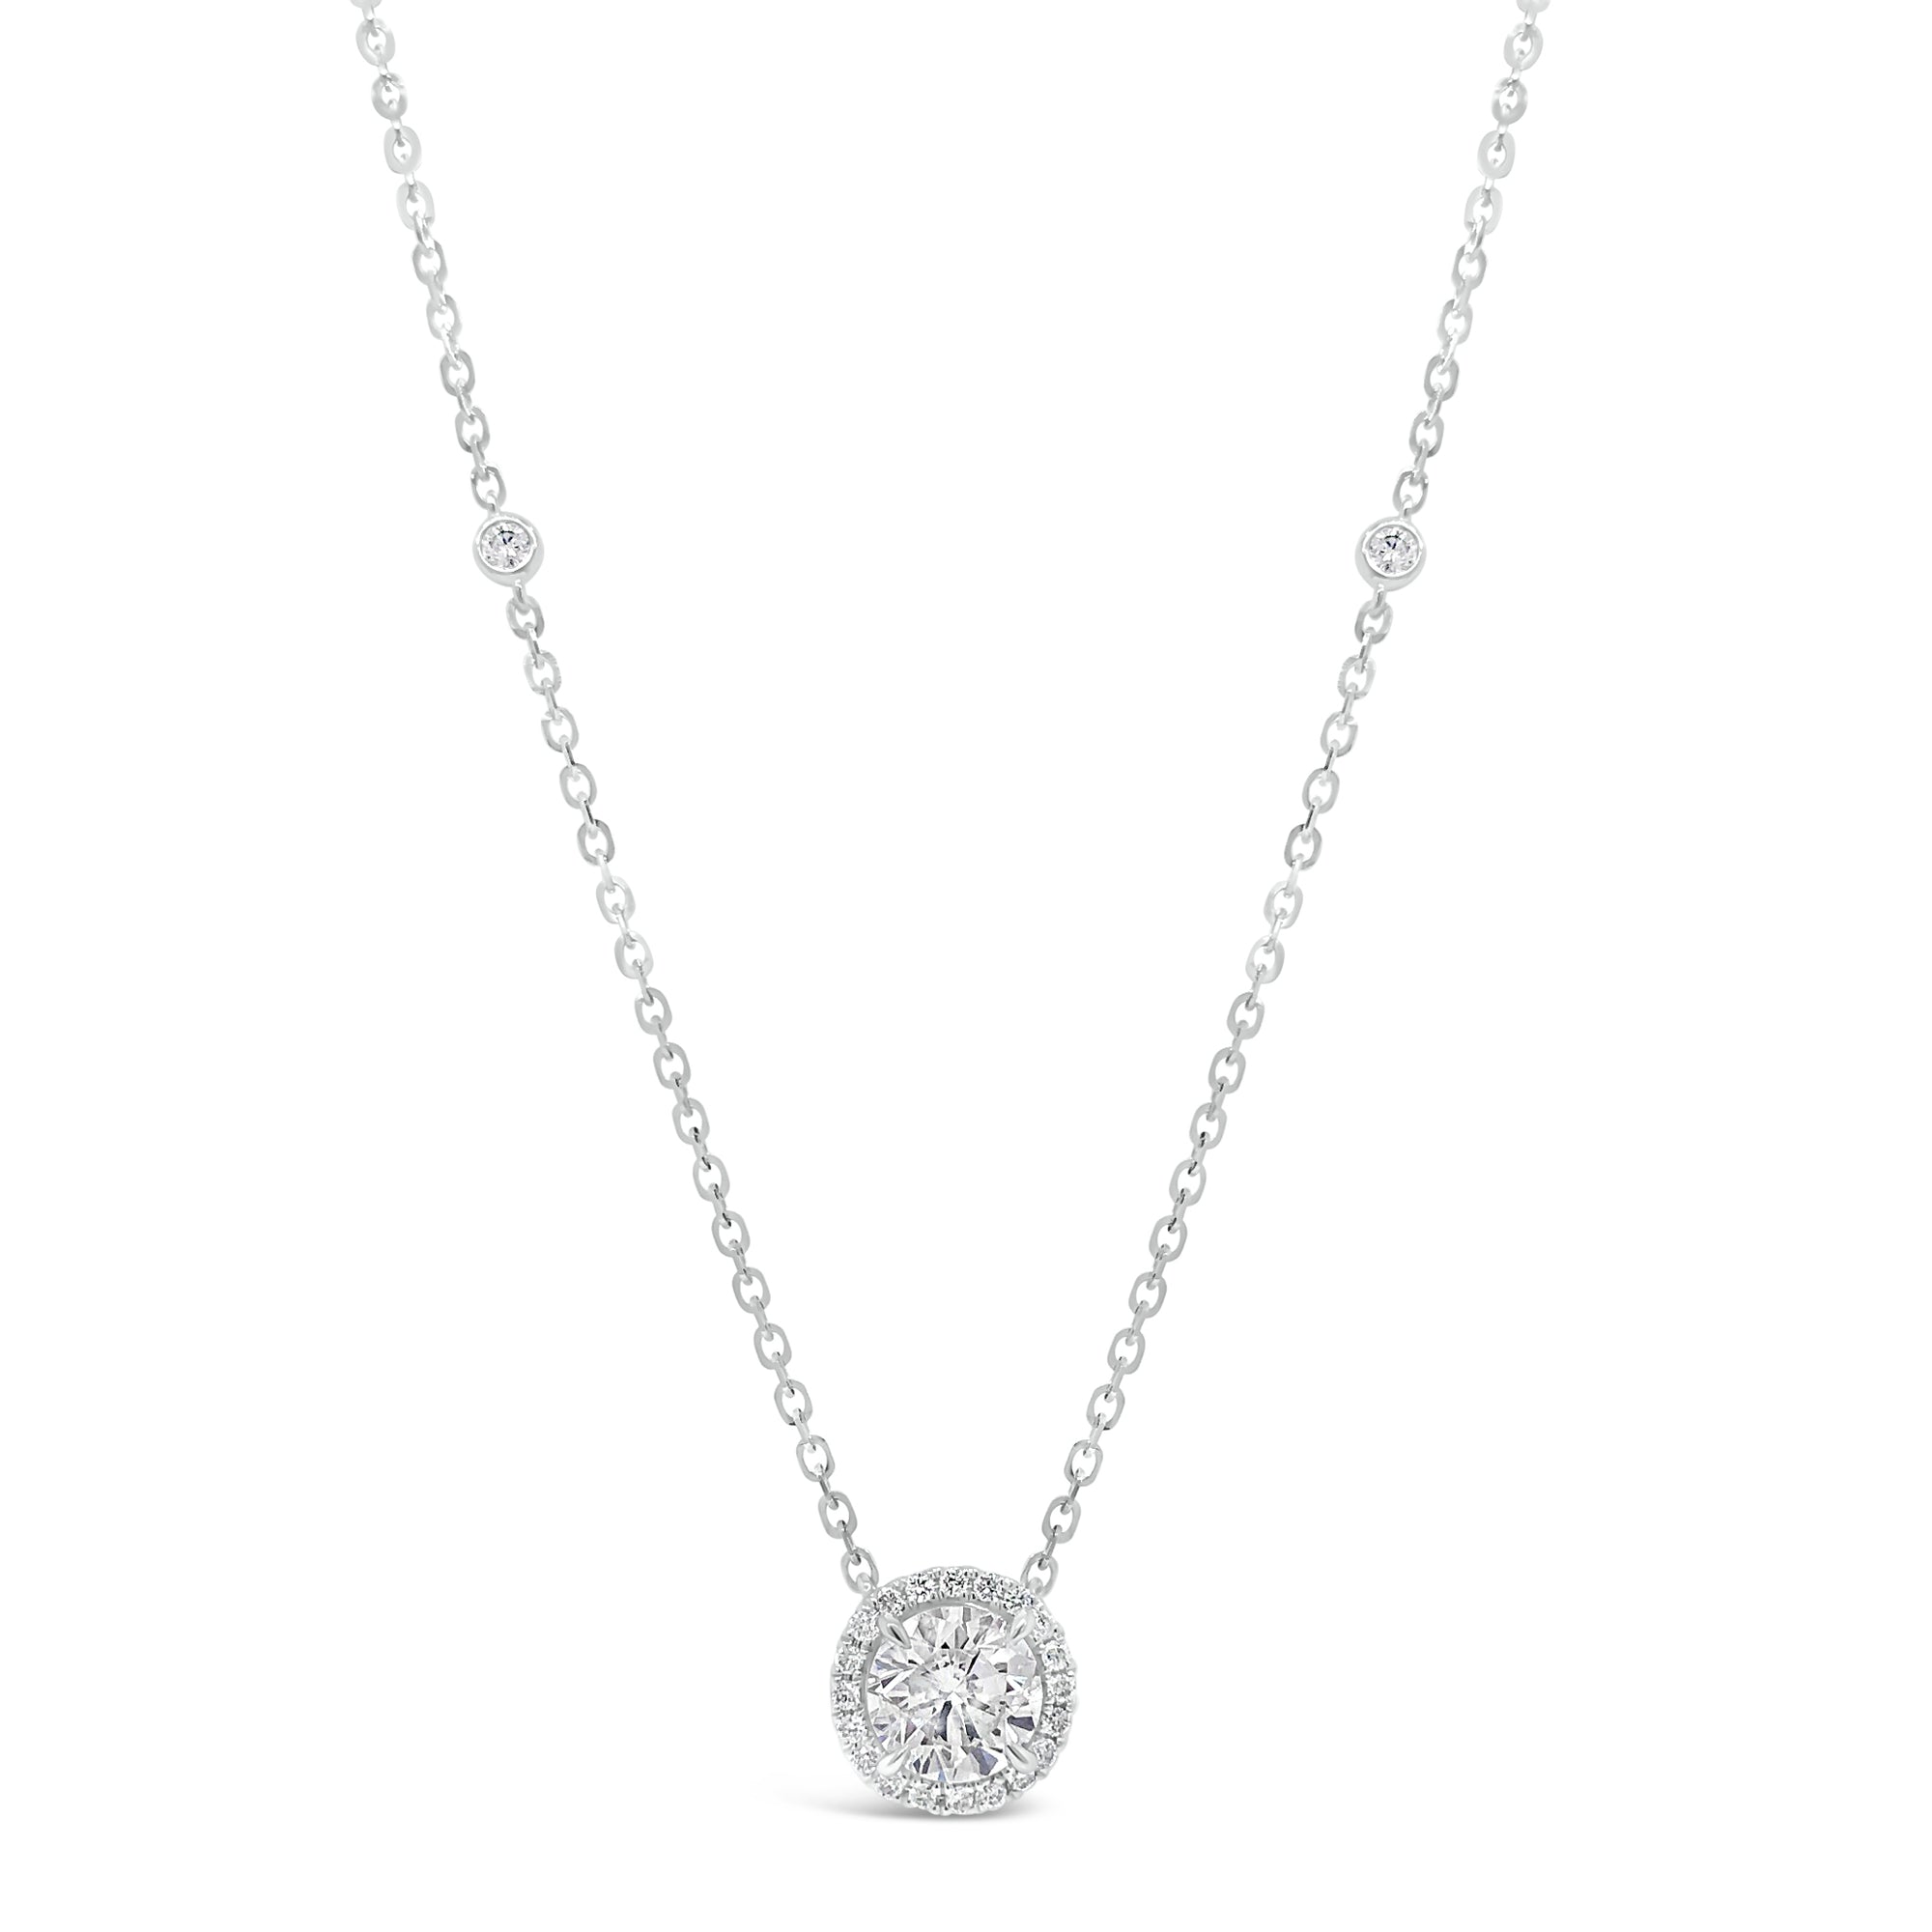 Round Diamond Halo Pendant Necklace with Bezel Set Diamond Stations - 1.01 ct diamond (GIA-graded I color, I2 clarity) - 0.19 ct (total weight for all other diamonds) white gold